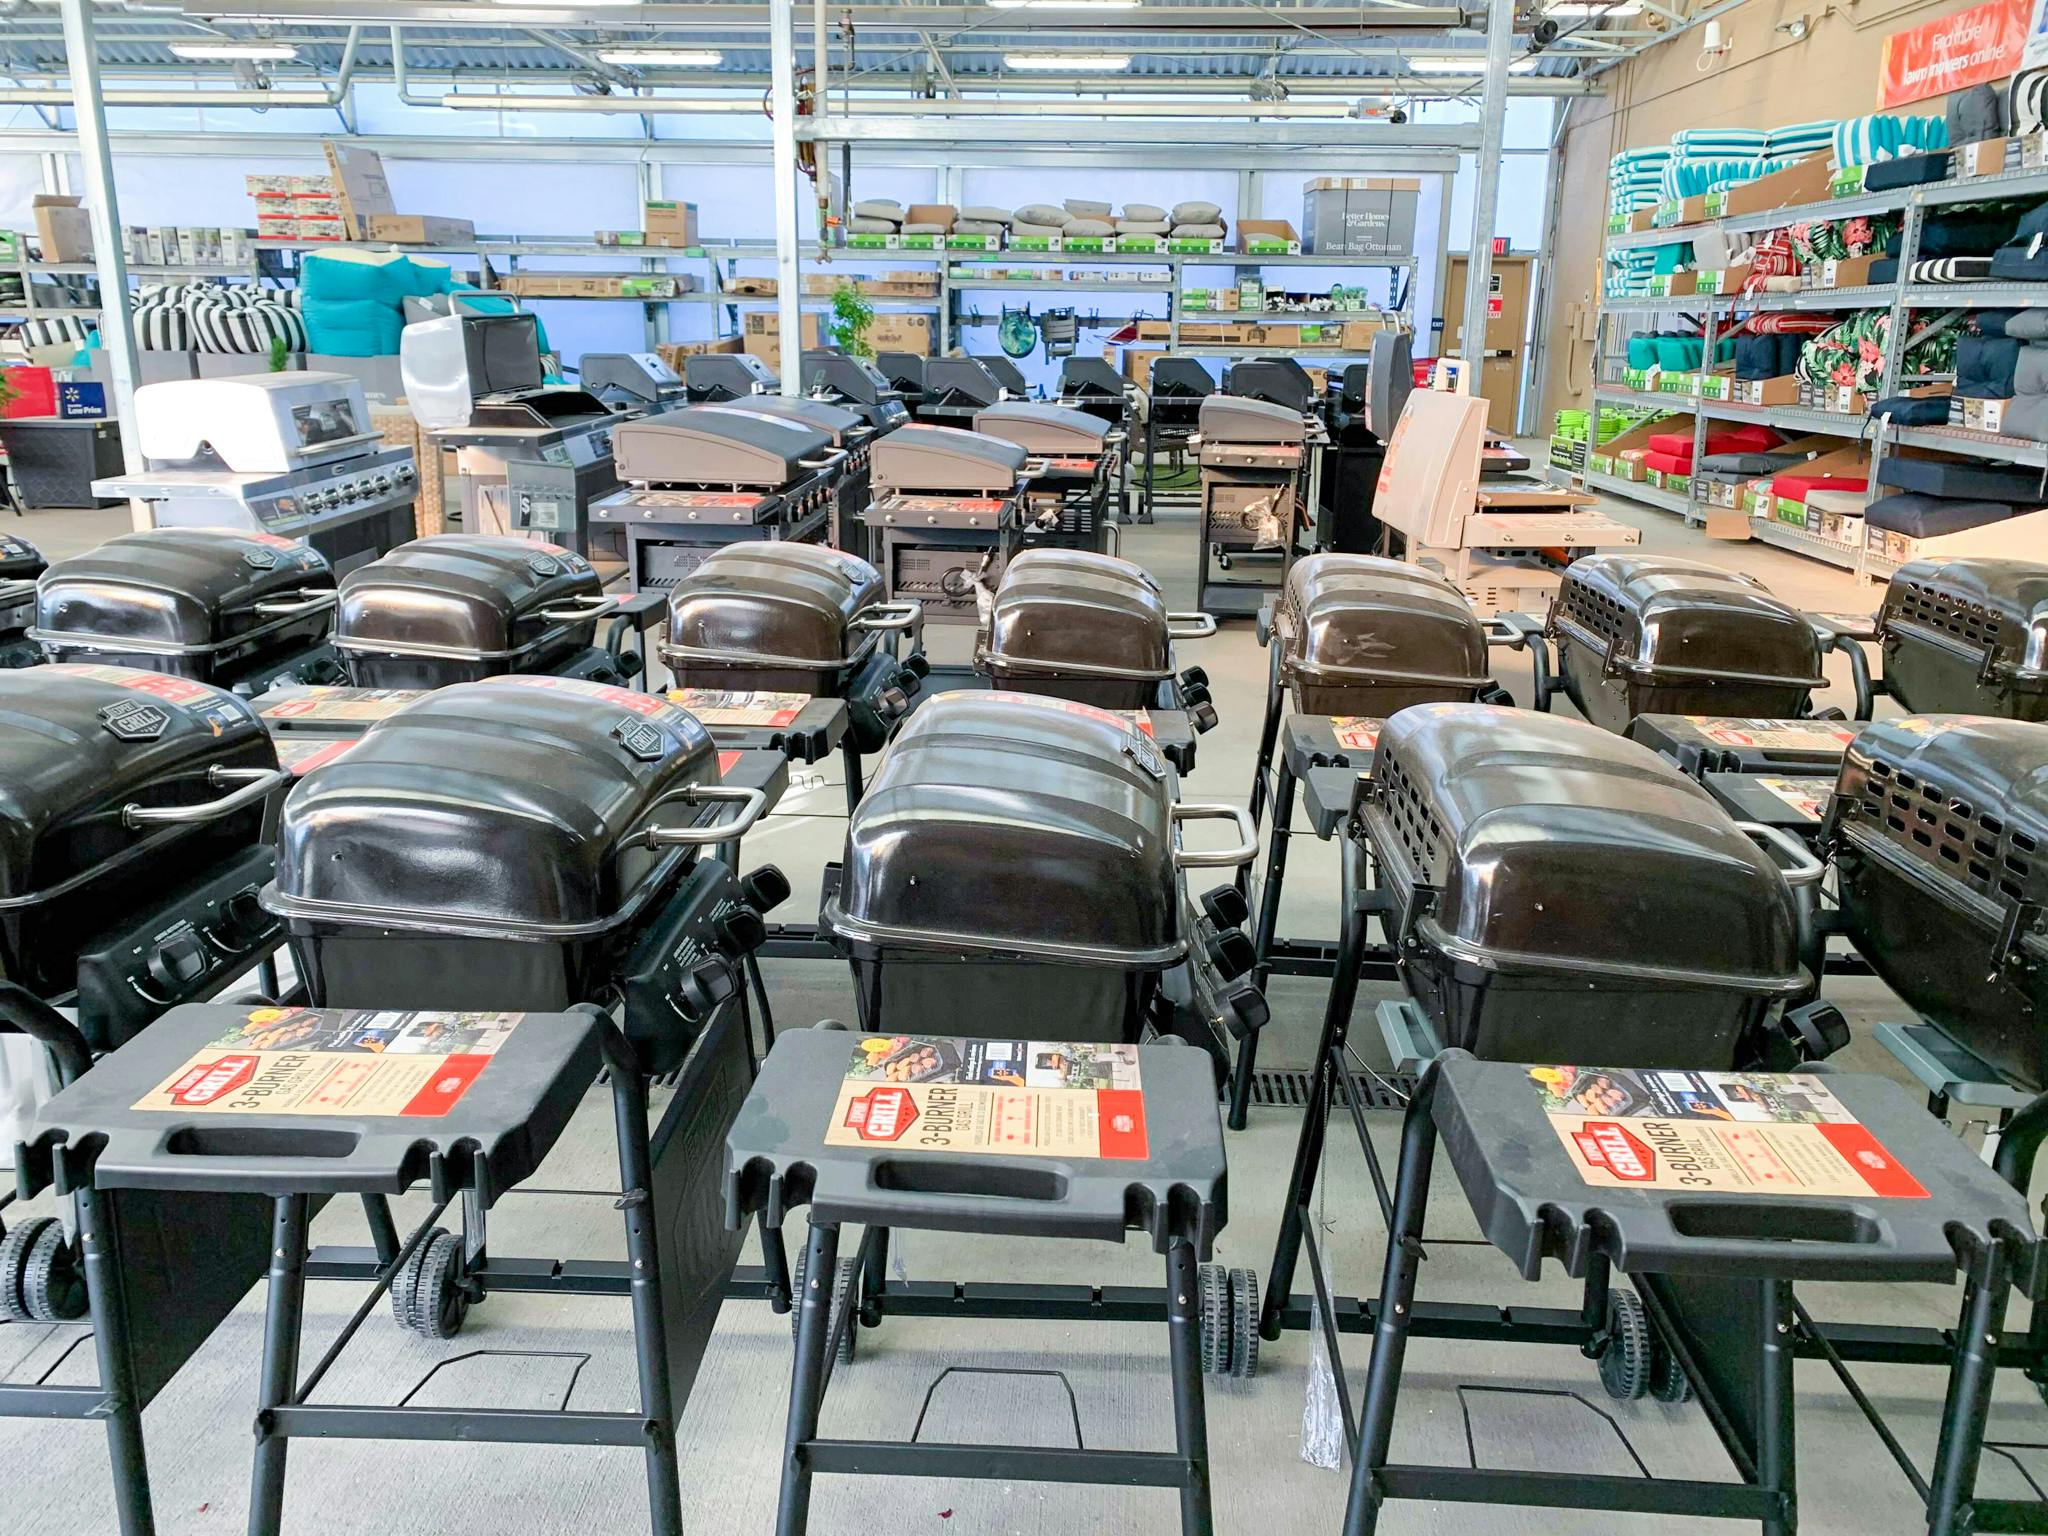 black grills lined up in store at Walmart in the Outdoor section